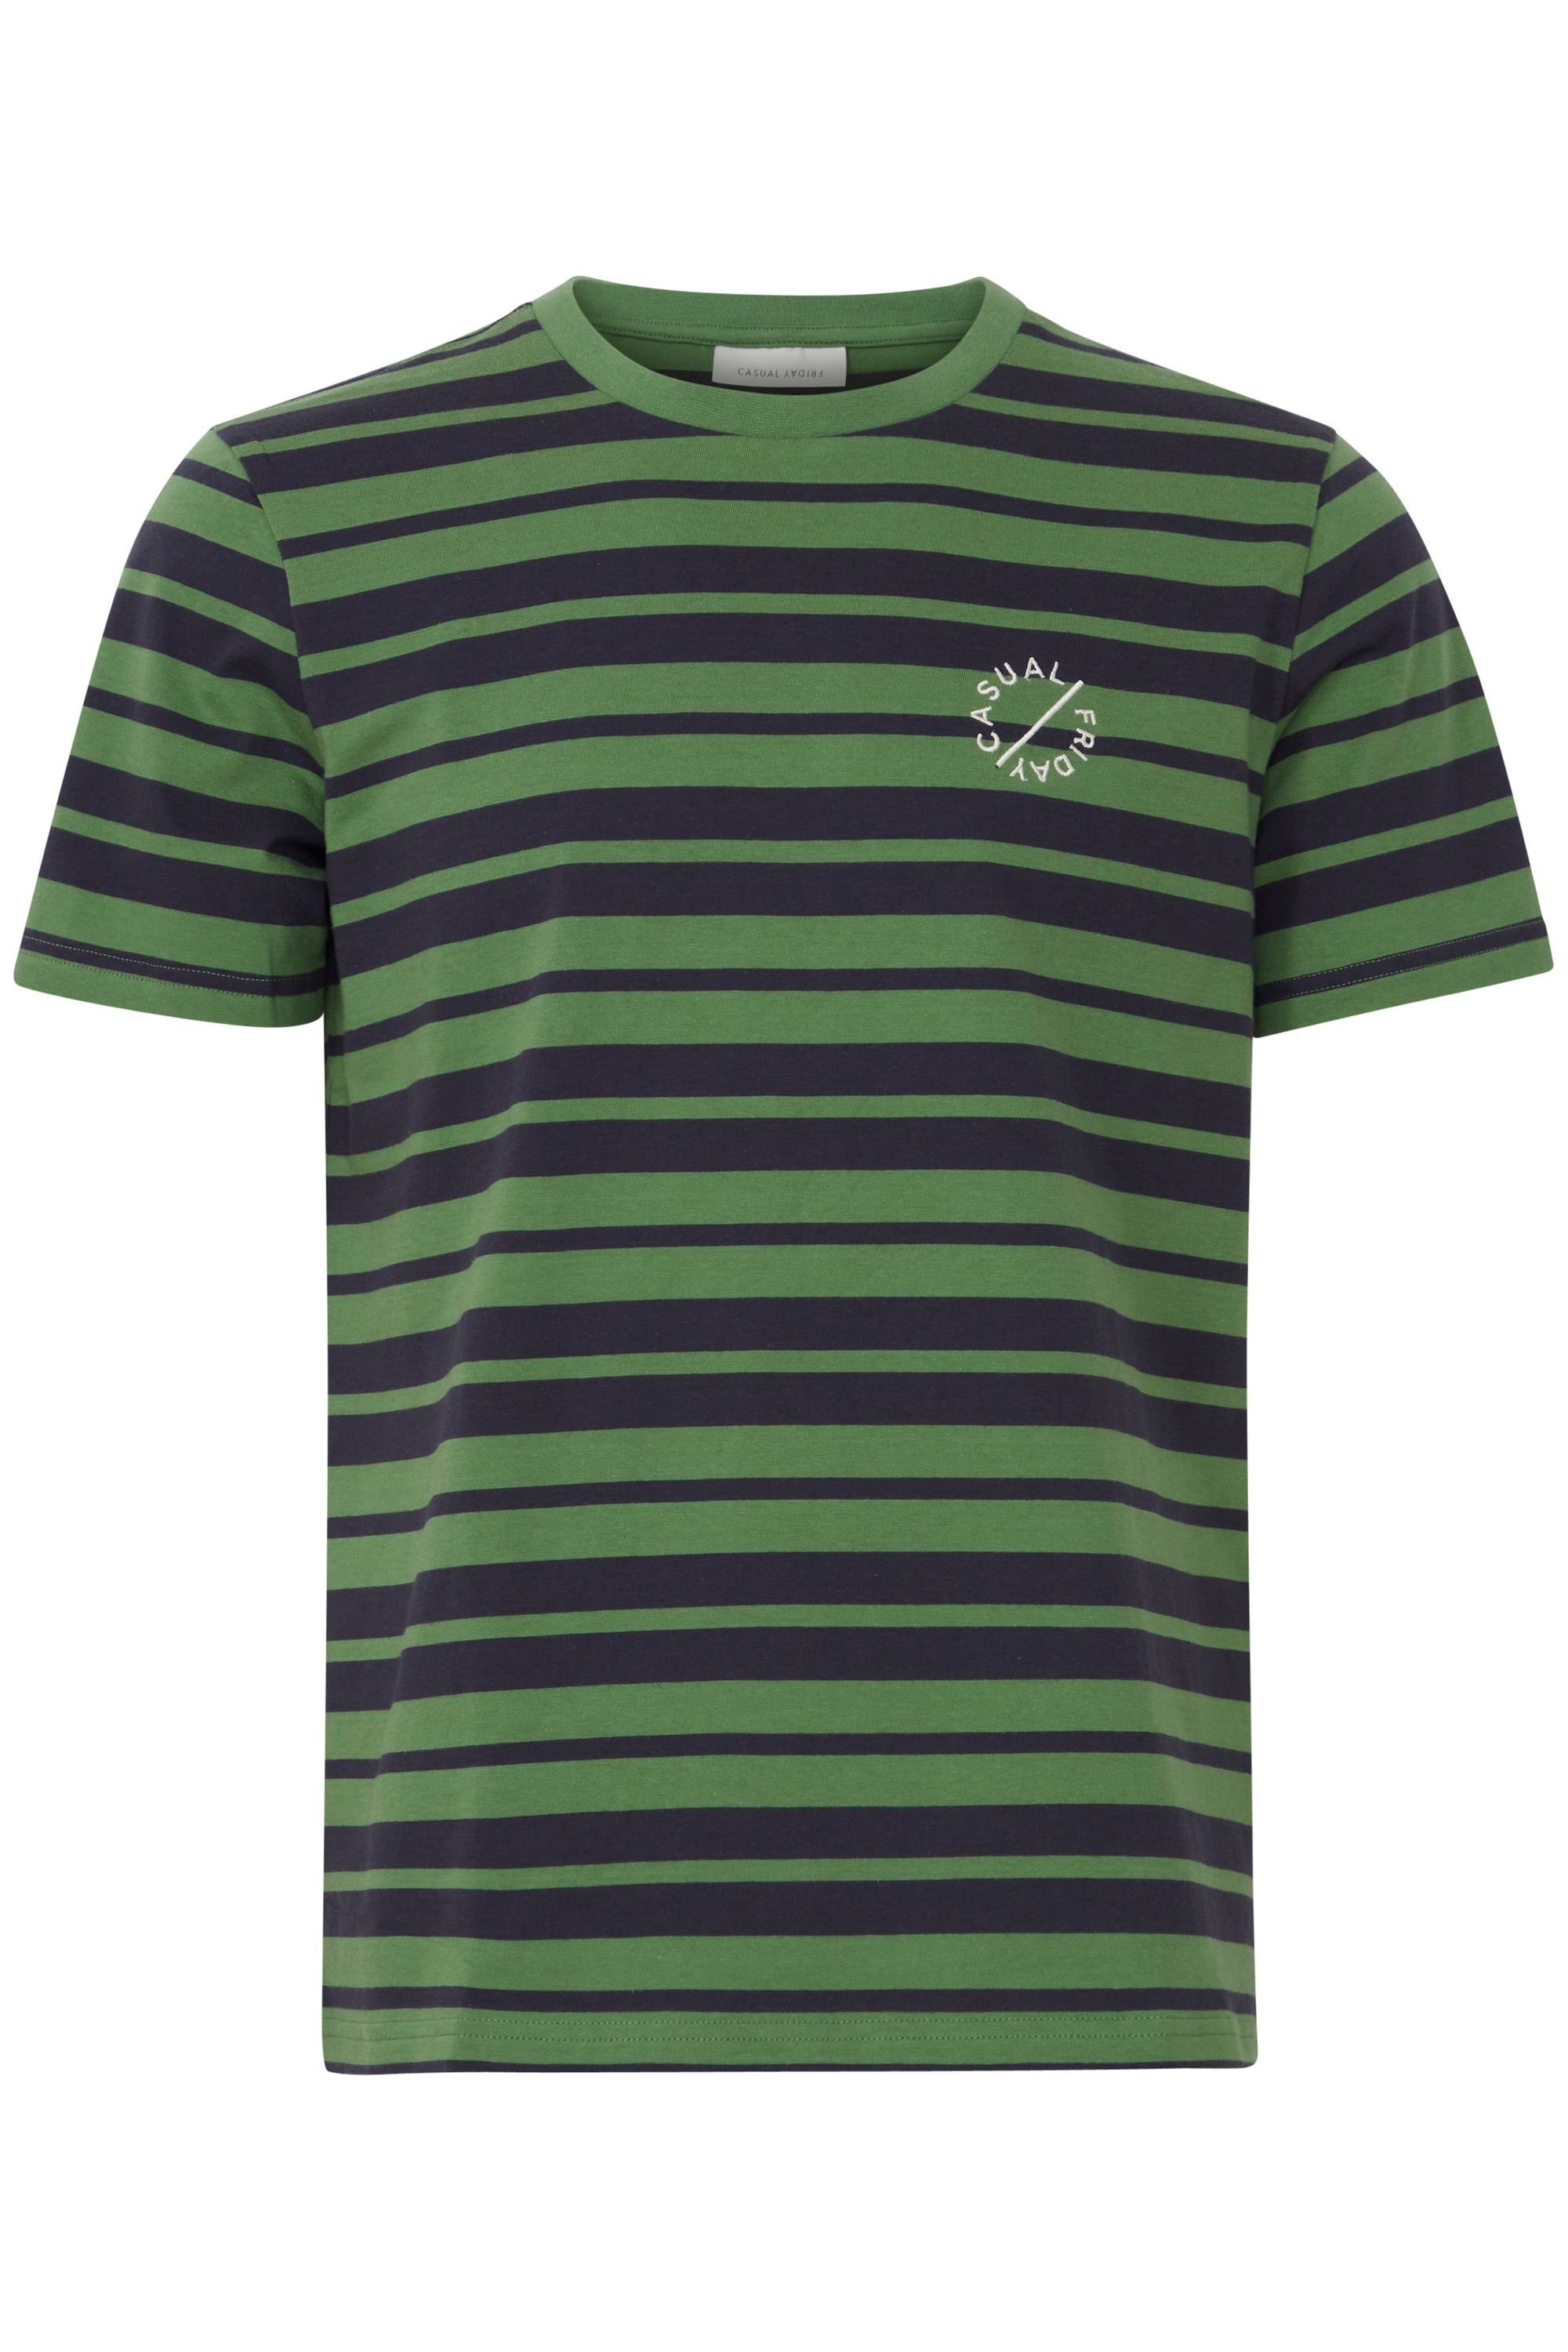 CFThor (180121) - 0059 tee Casual Elm striped Green Friday 20504603 Y/D T-Shirt